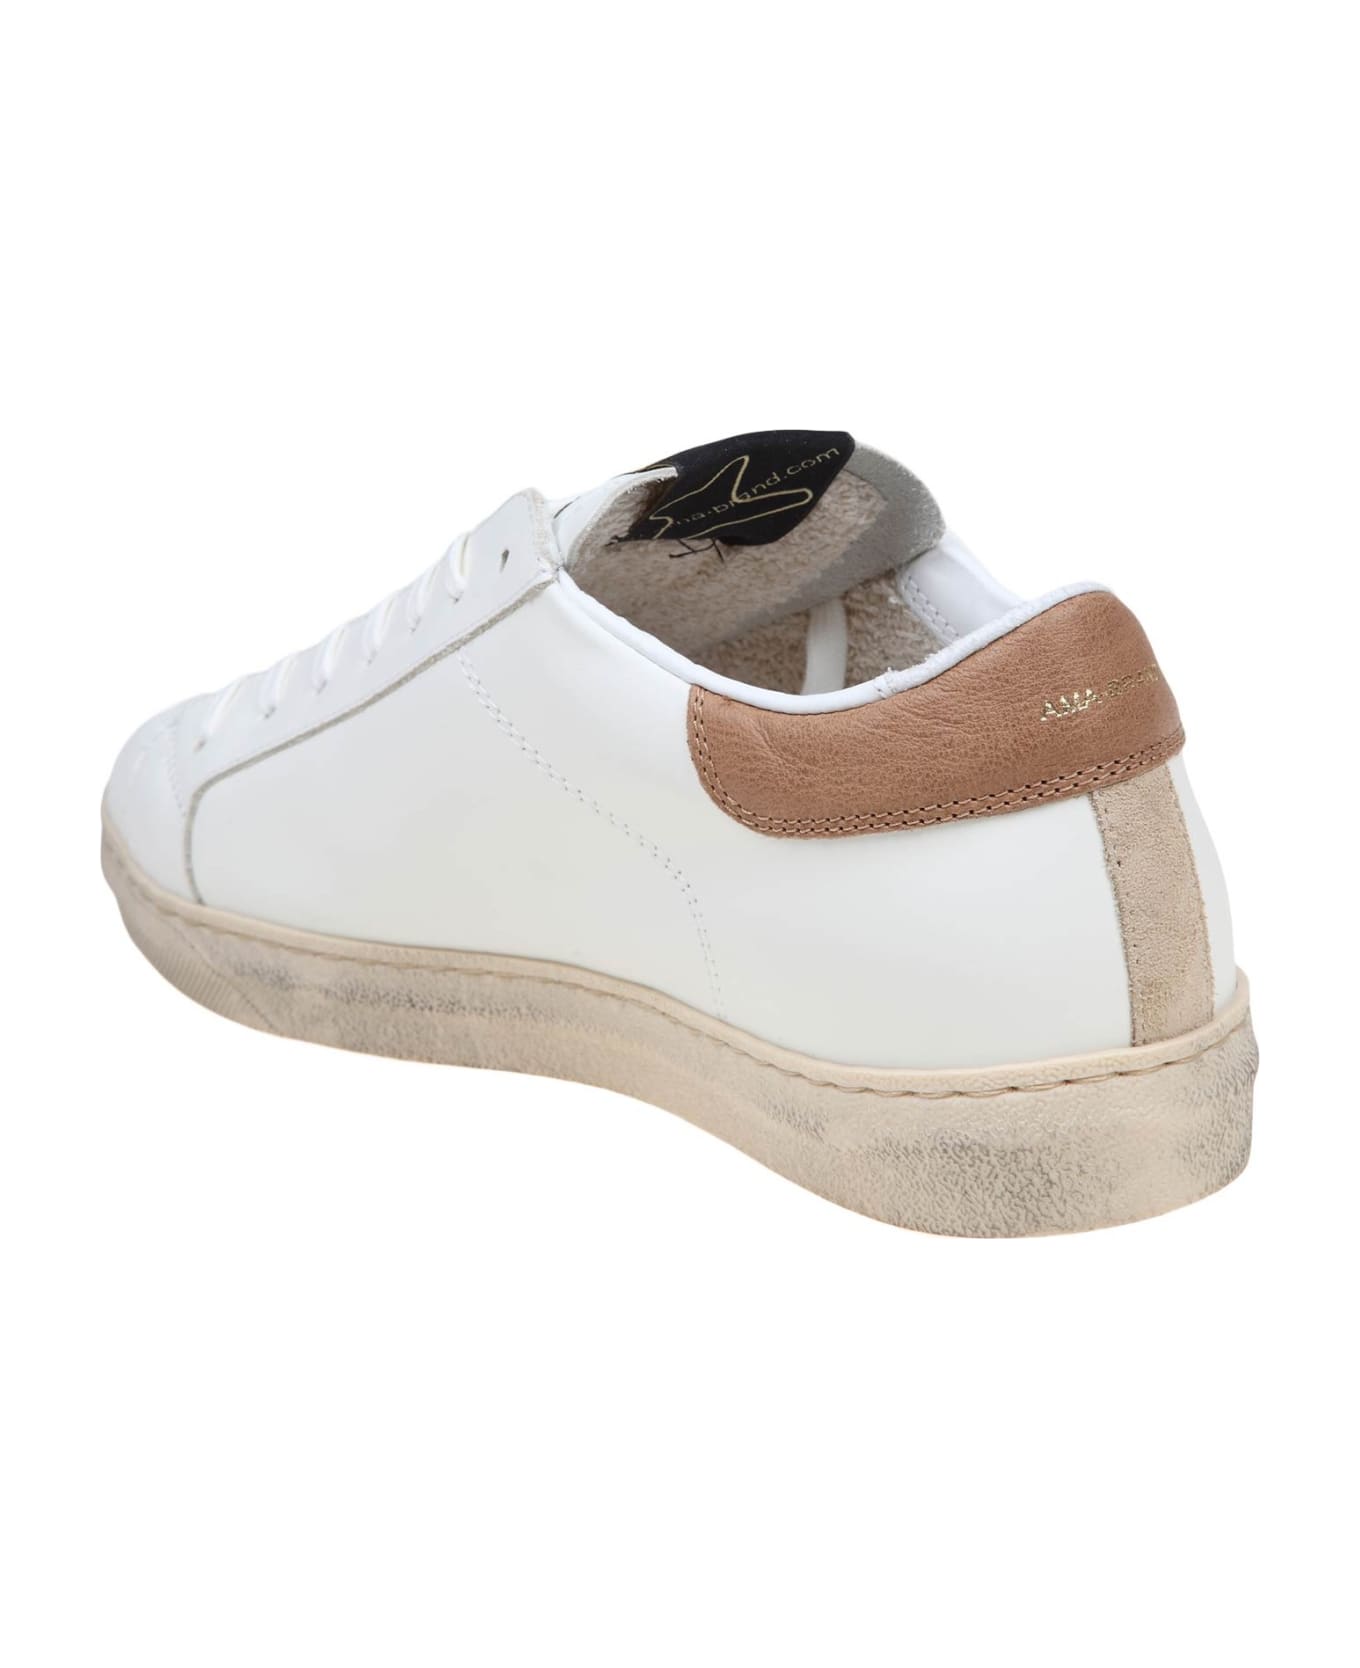 AMA-BRAND White And Taupe Leather Sneakers - WHITE/TAUPE スニーカー